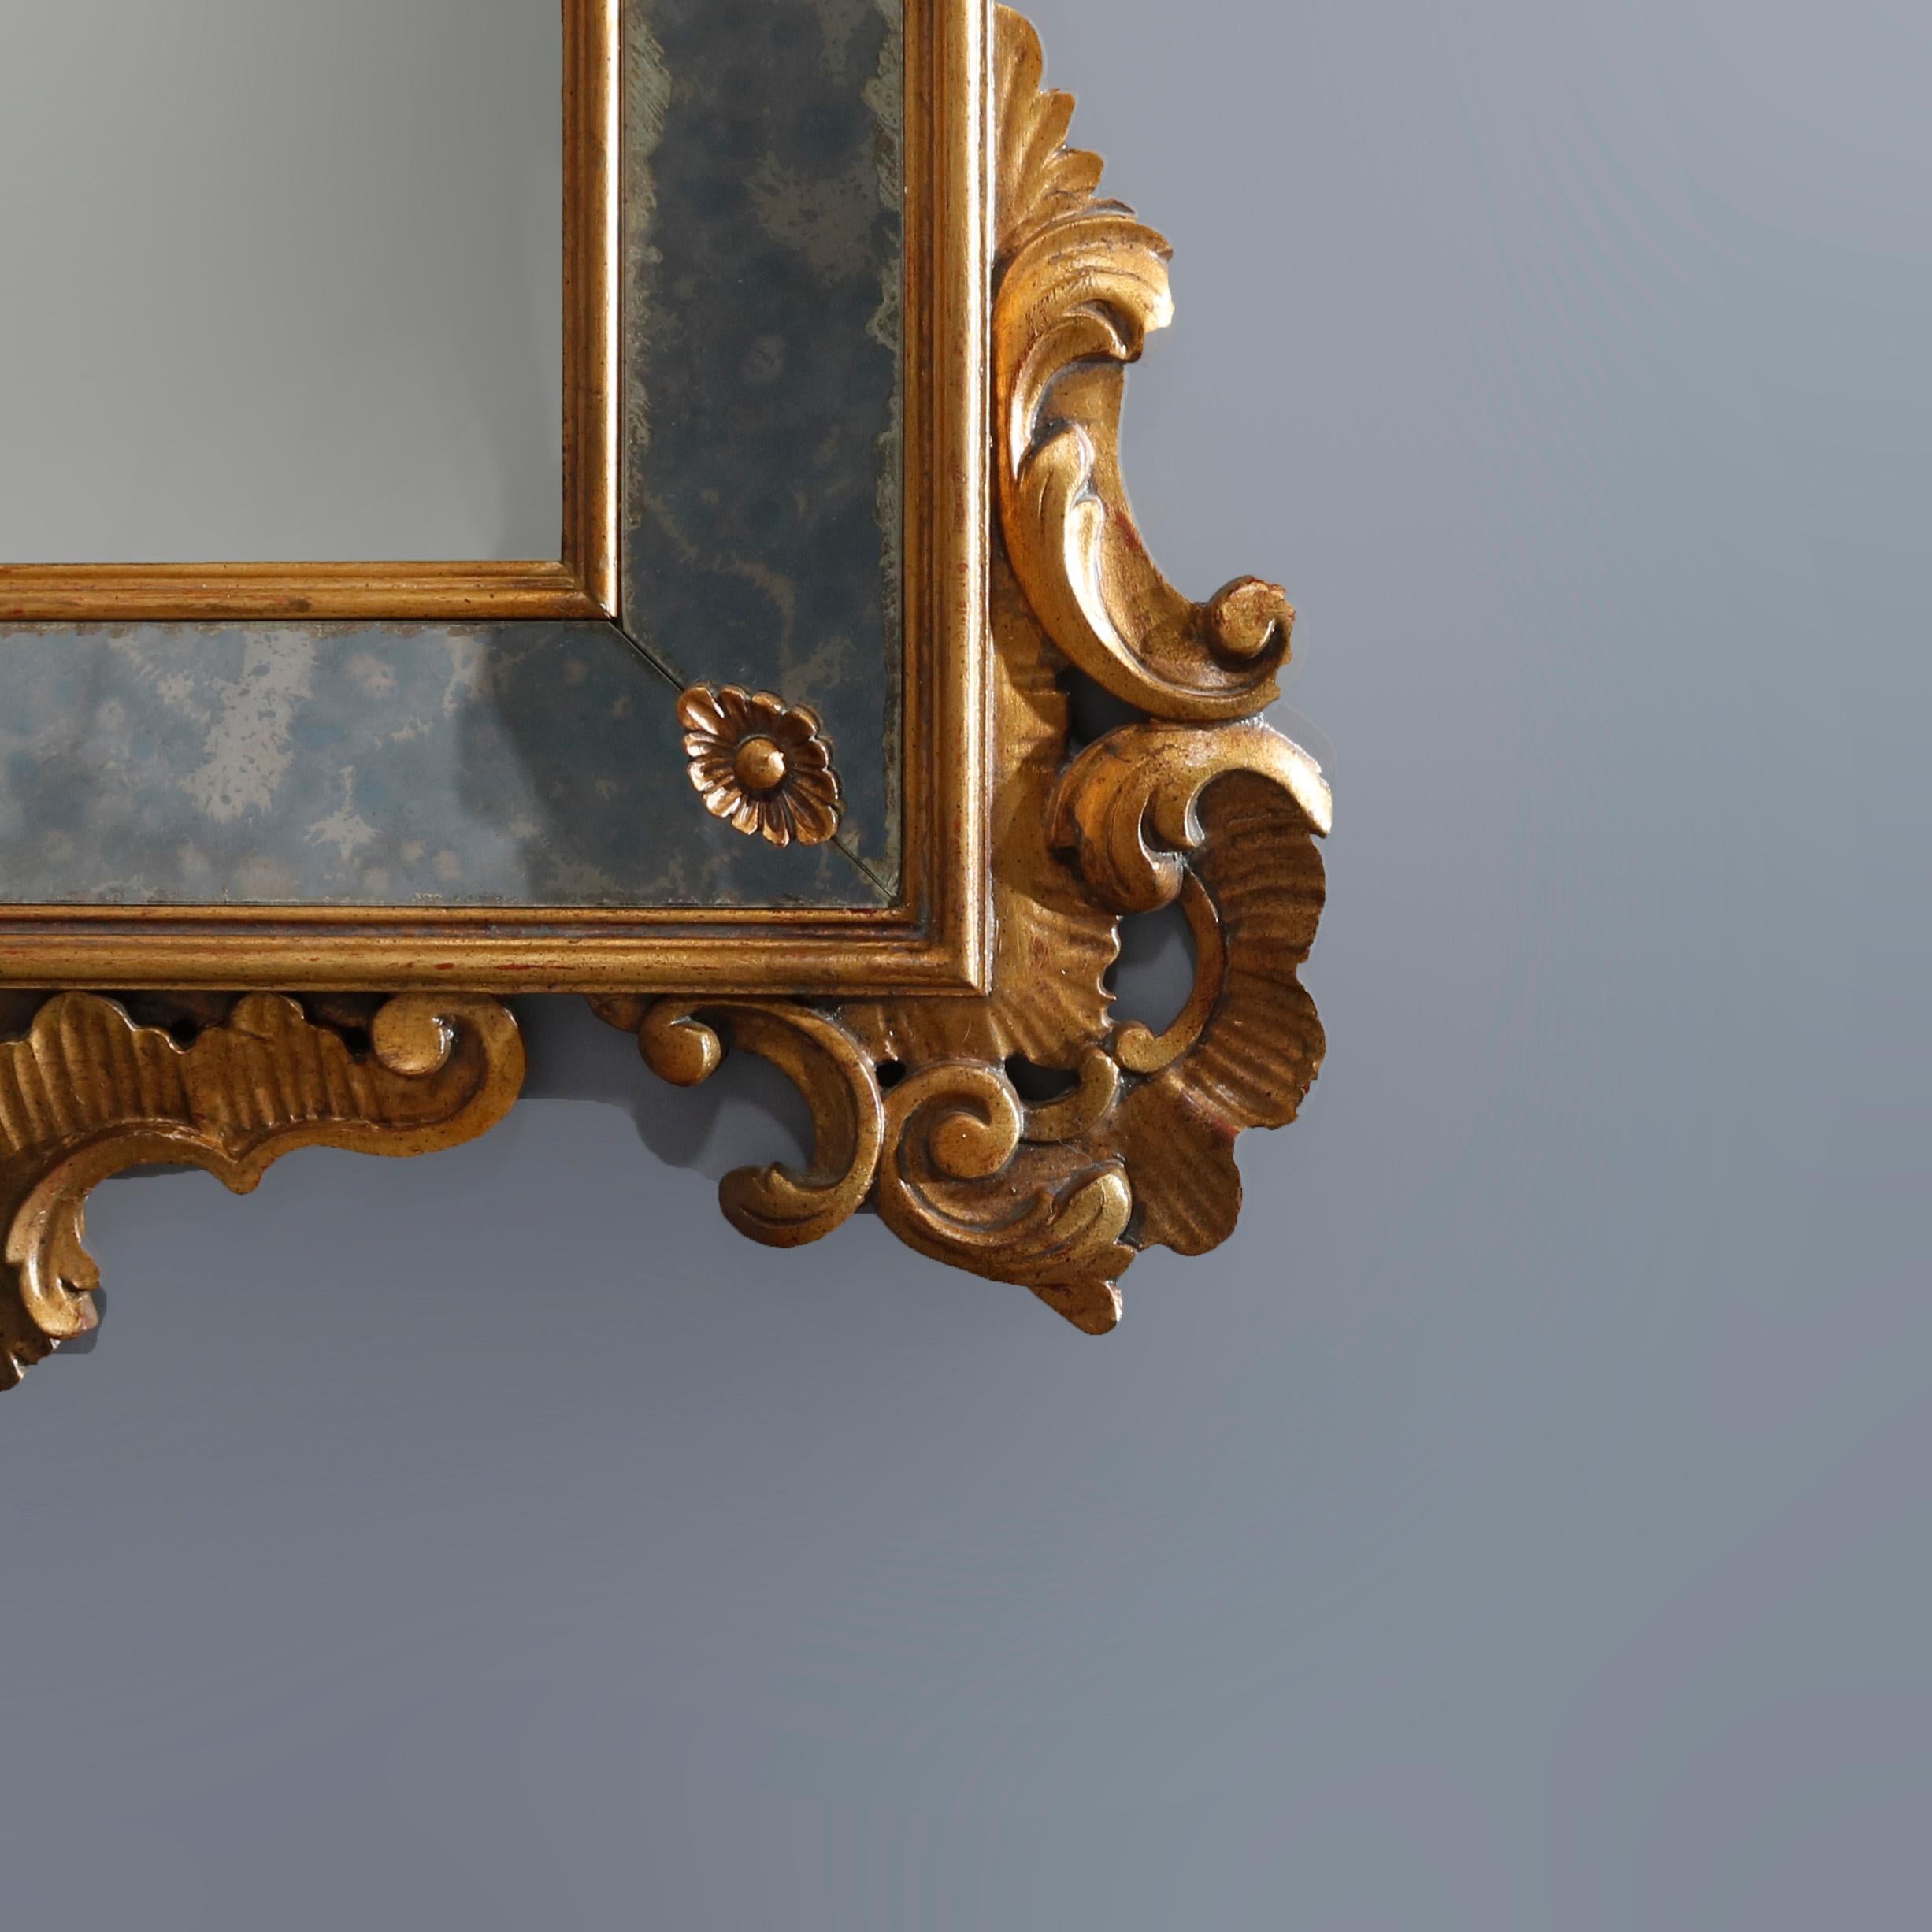 Vintage Italian Rococo Style Giltwood Parclose Over Mantel Mirror by Karges 11